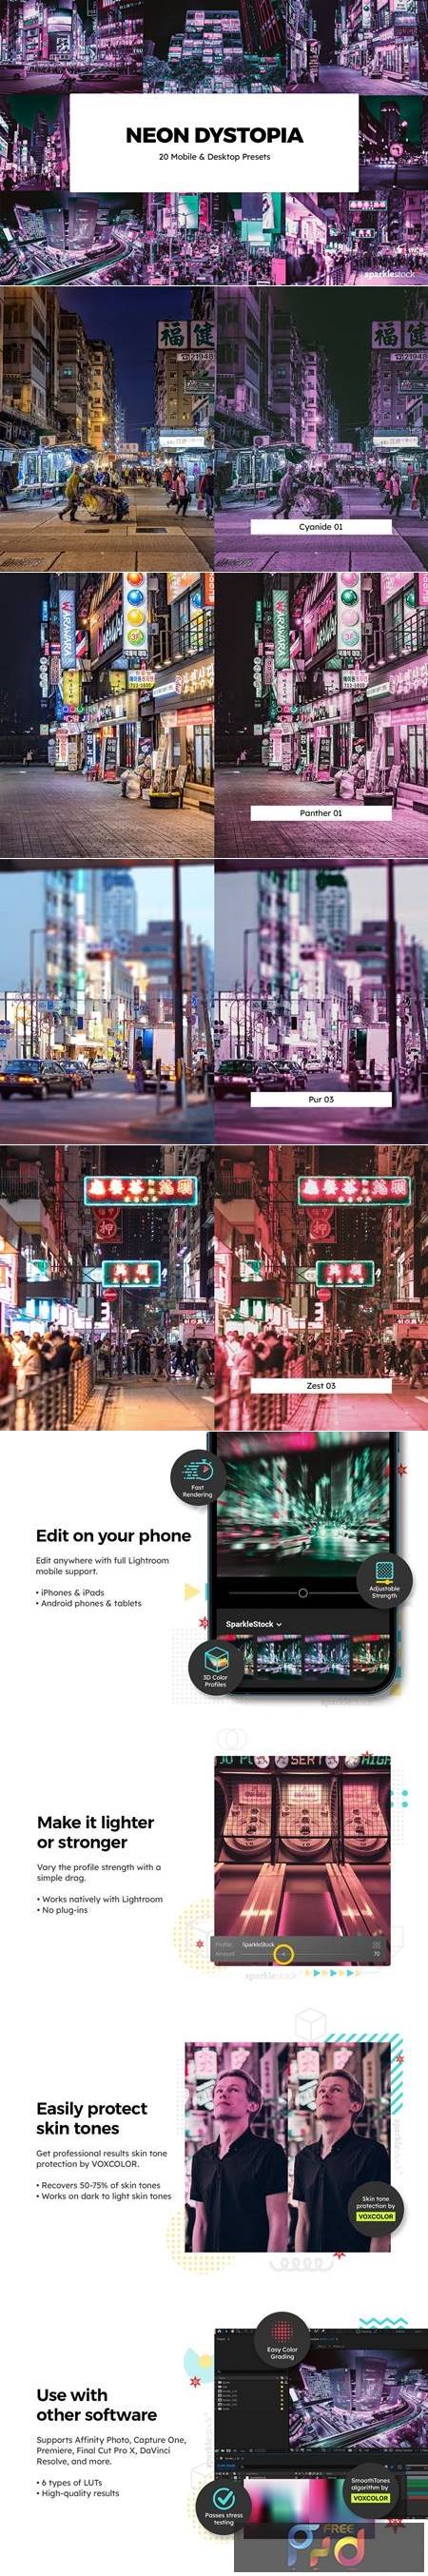 20 Neon Dystopia Lightroom Presets & LUTs F6LYTY4 1